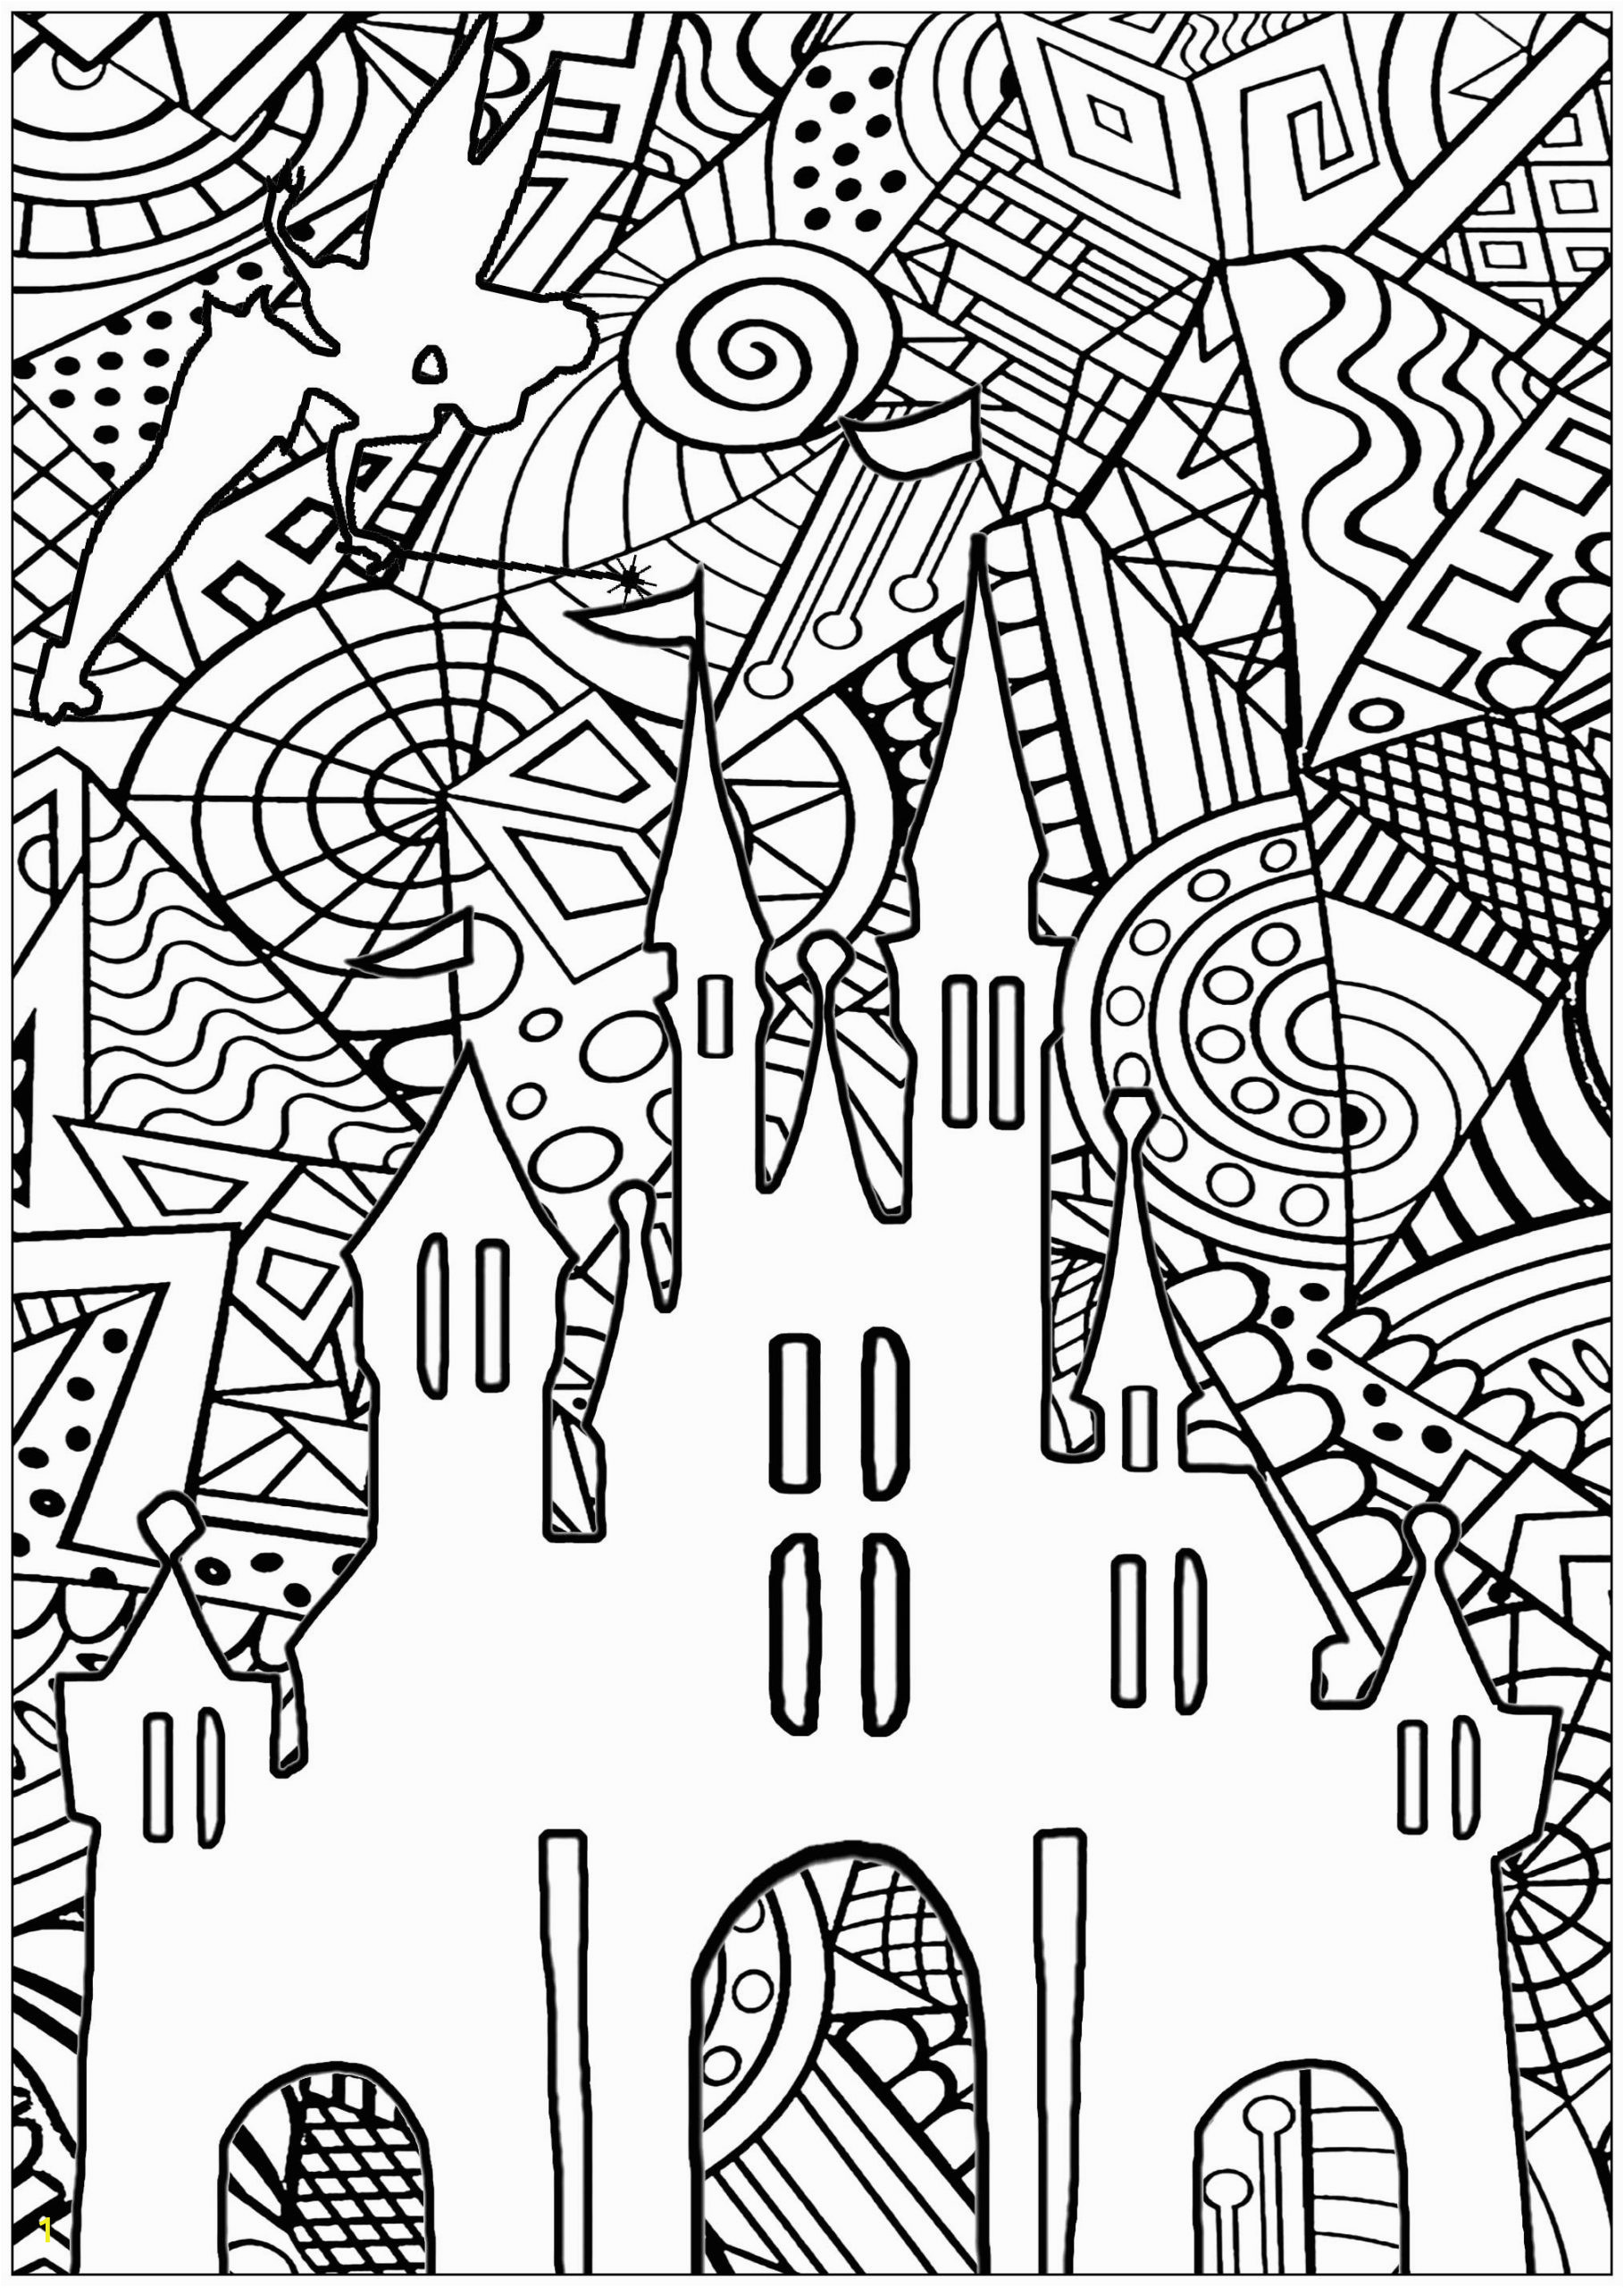 disney adult colouring pages pug coloring cool for kids aladdin lego jurassic world colour bar book children playing acotar christmas color by number pilgrim diy football helmet my scaled